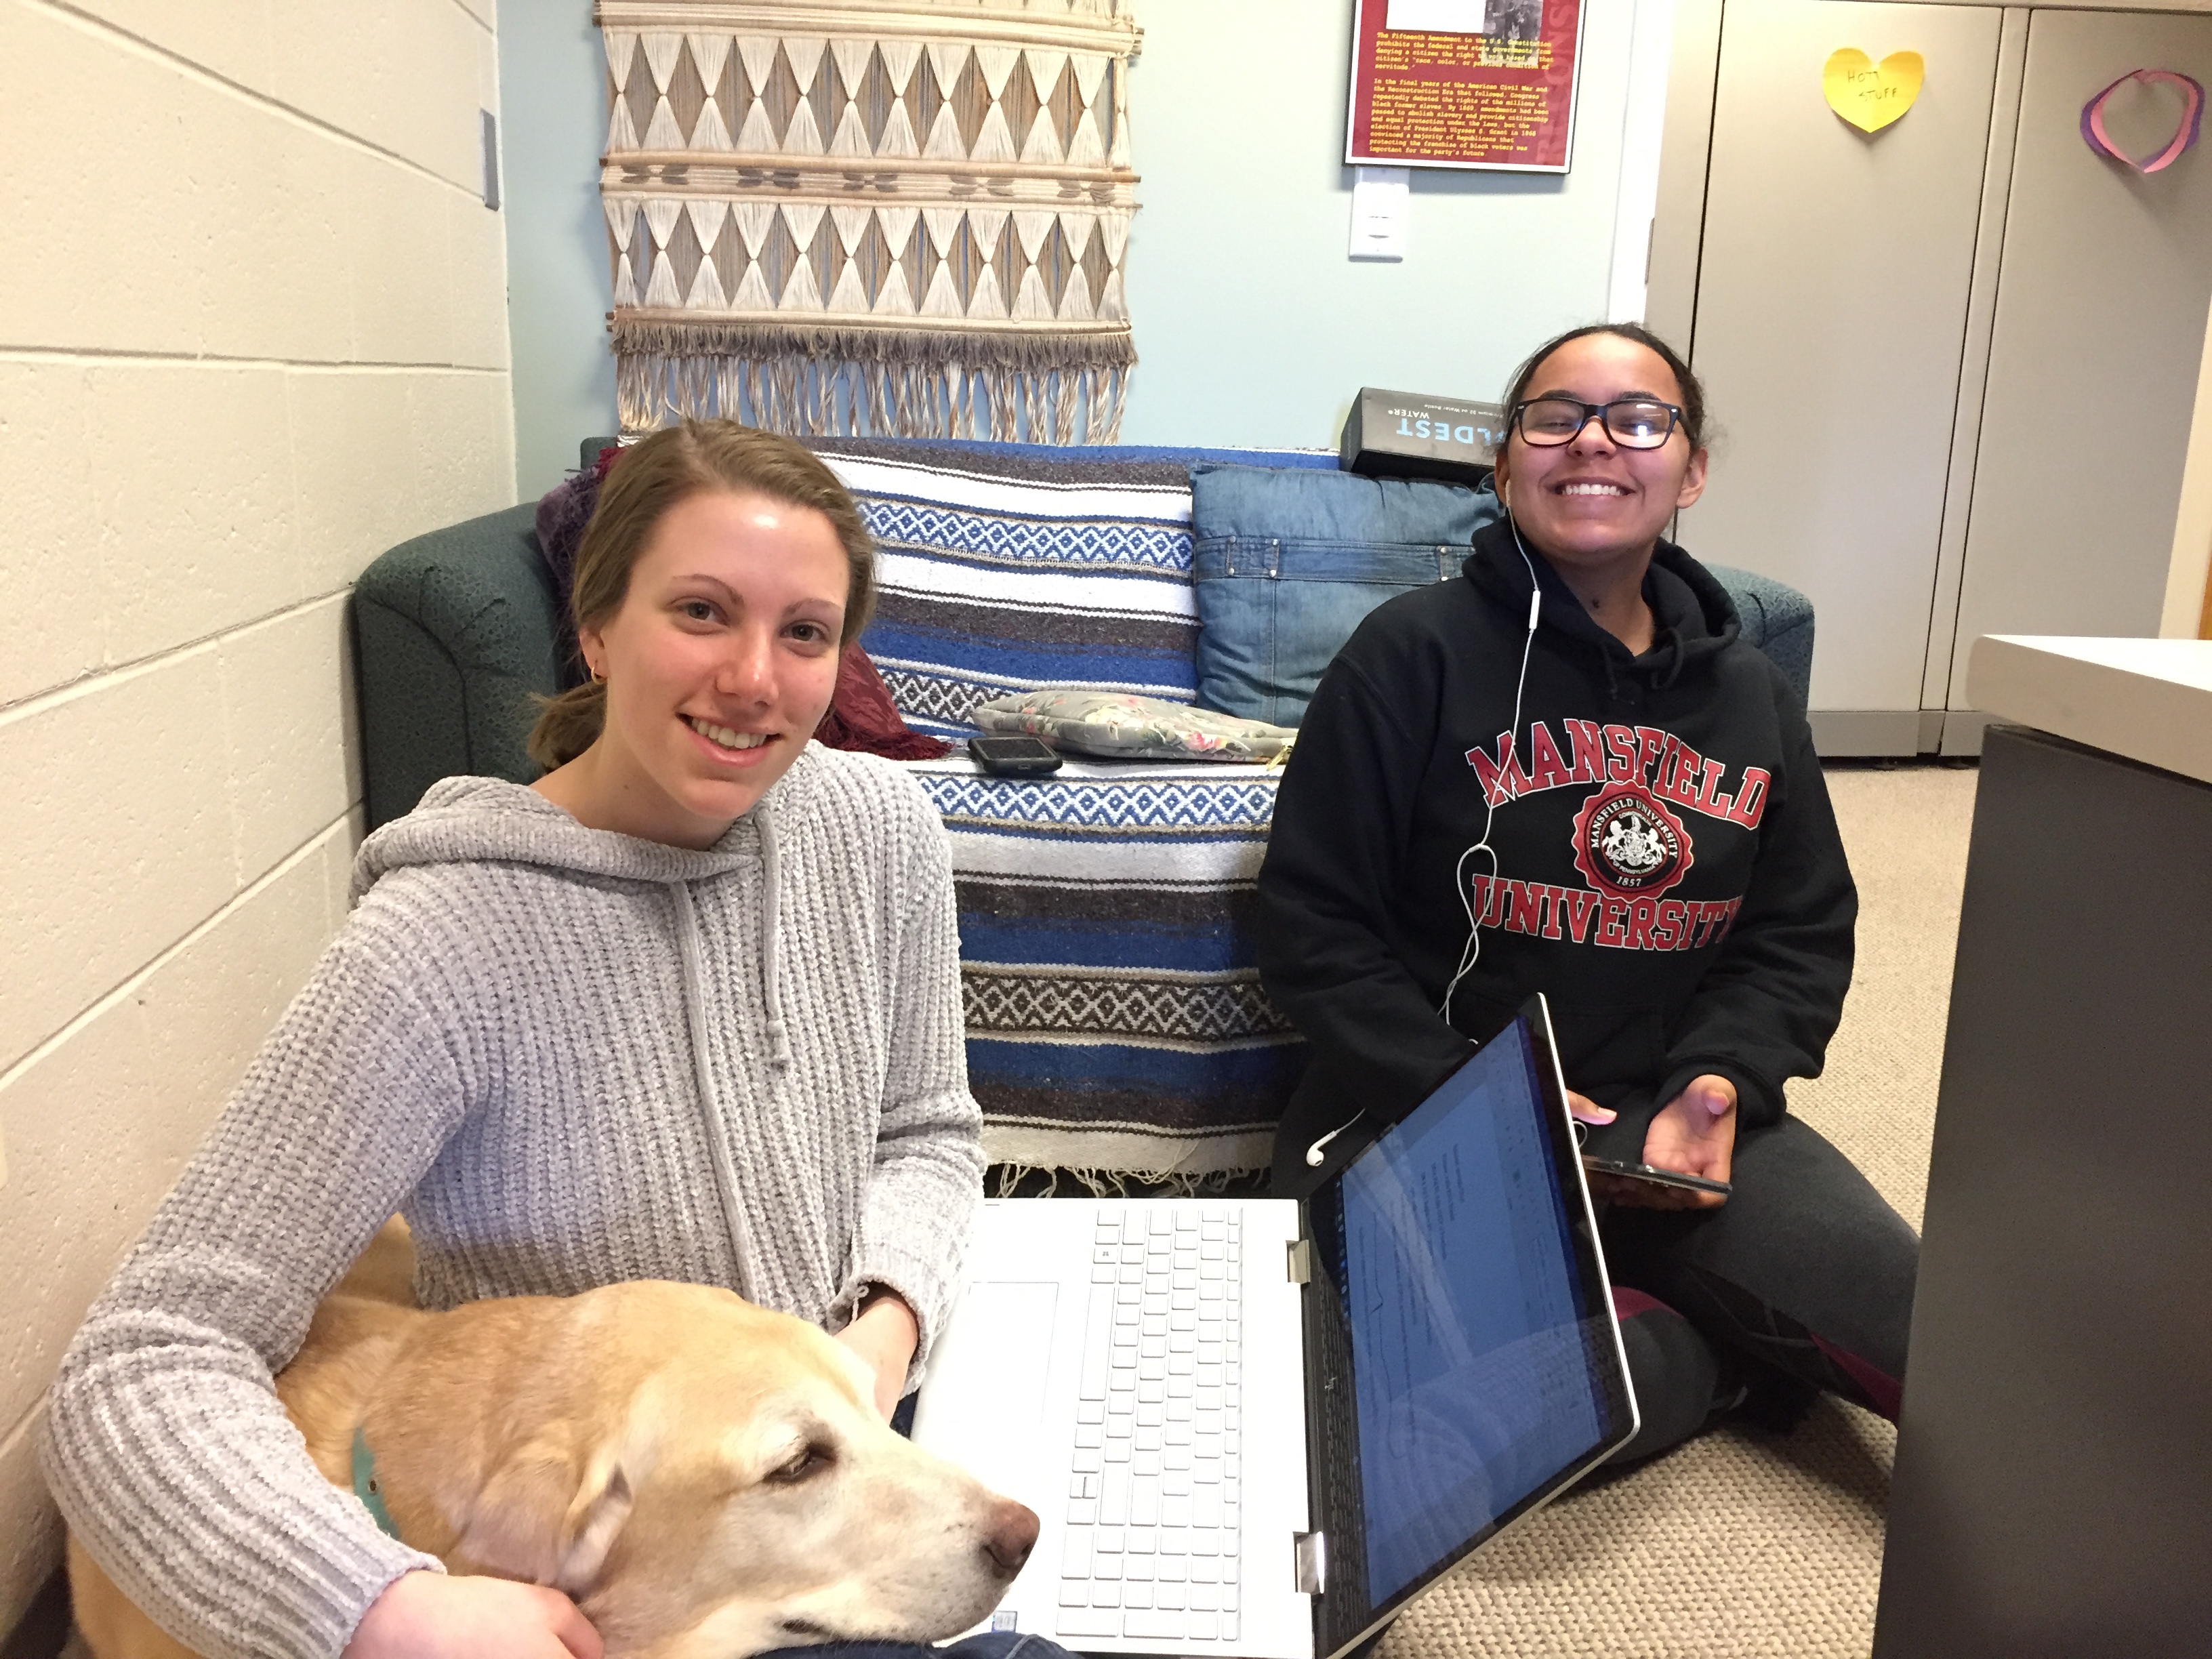 Students studying with dogs